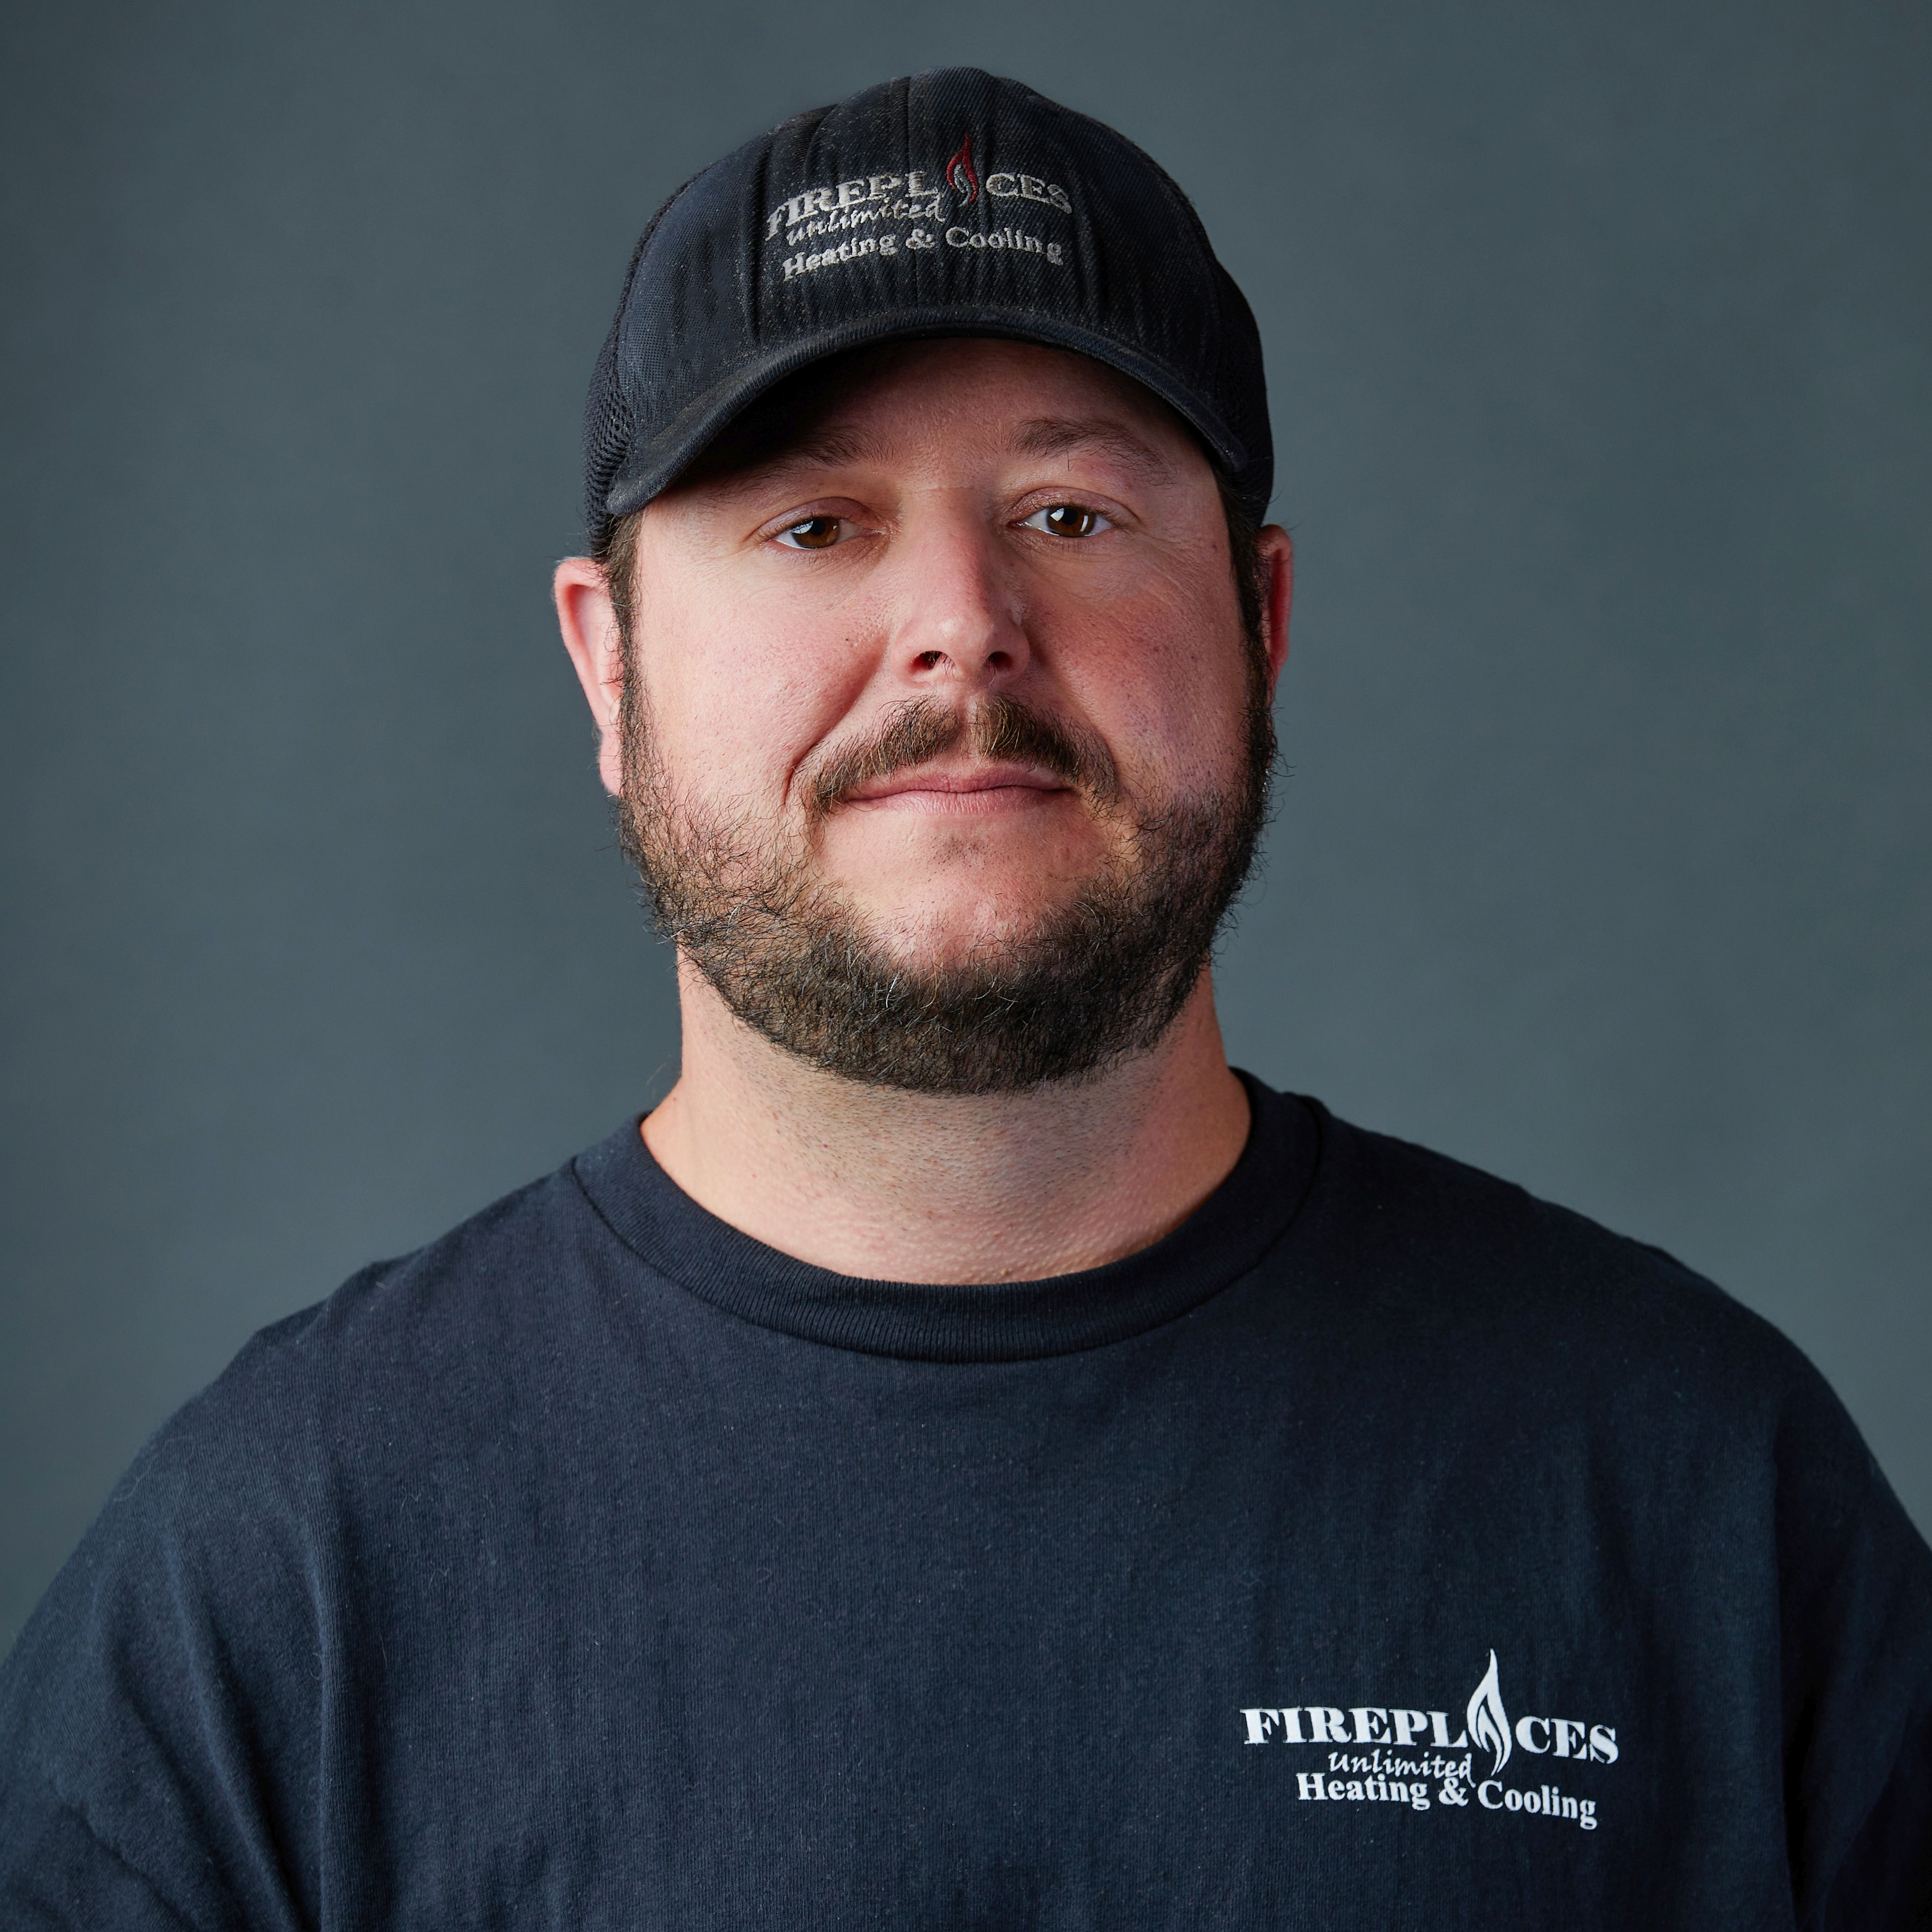 Patrick | Fireplaces Unlimited Heating & Cooling